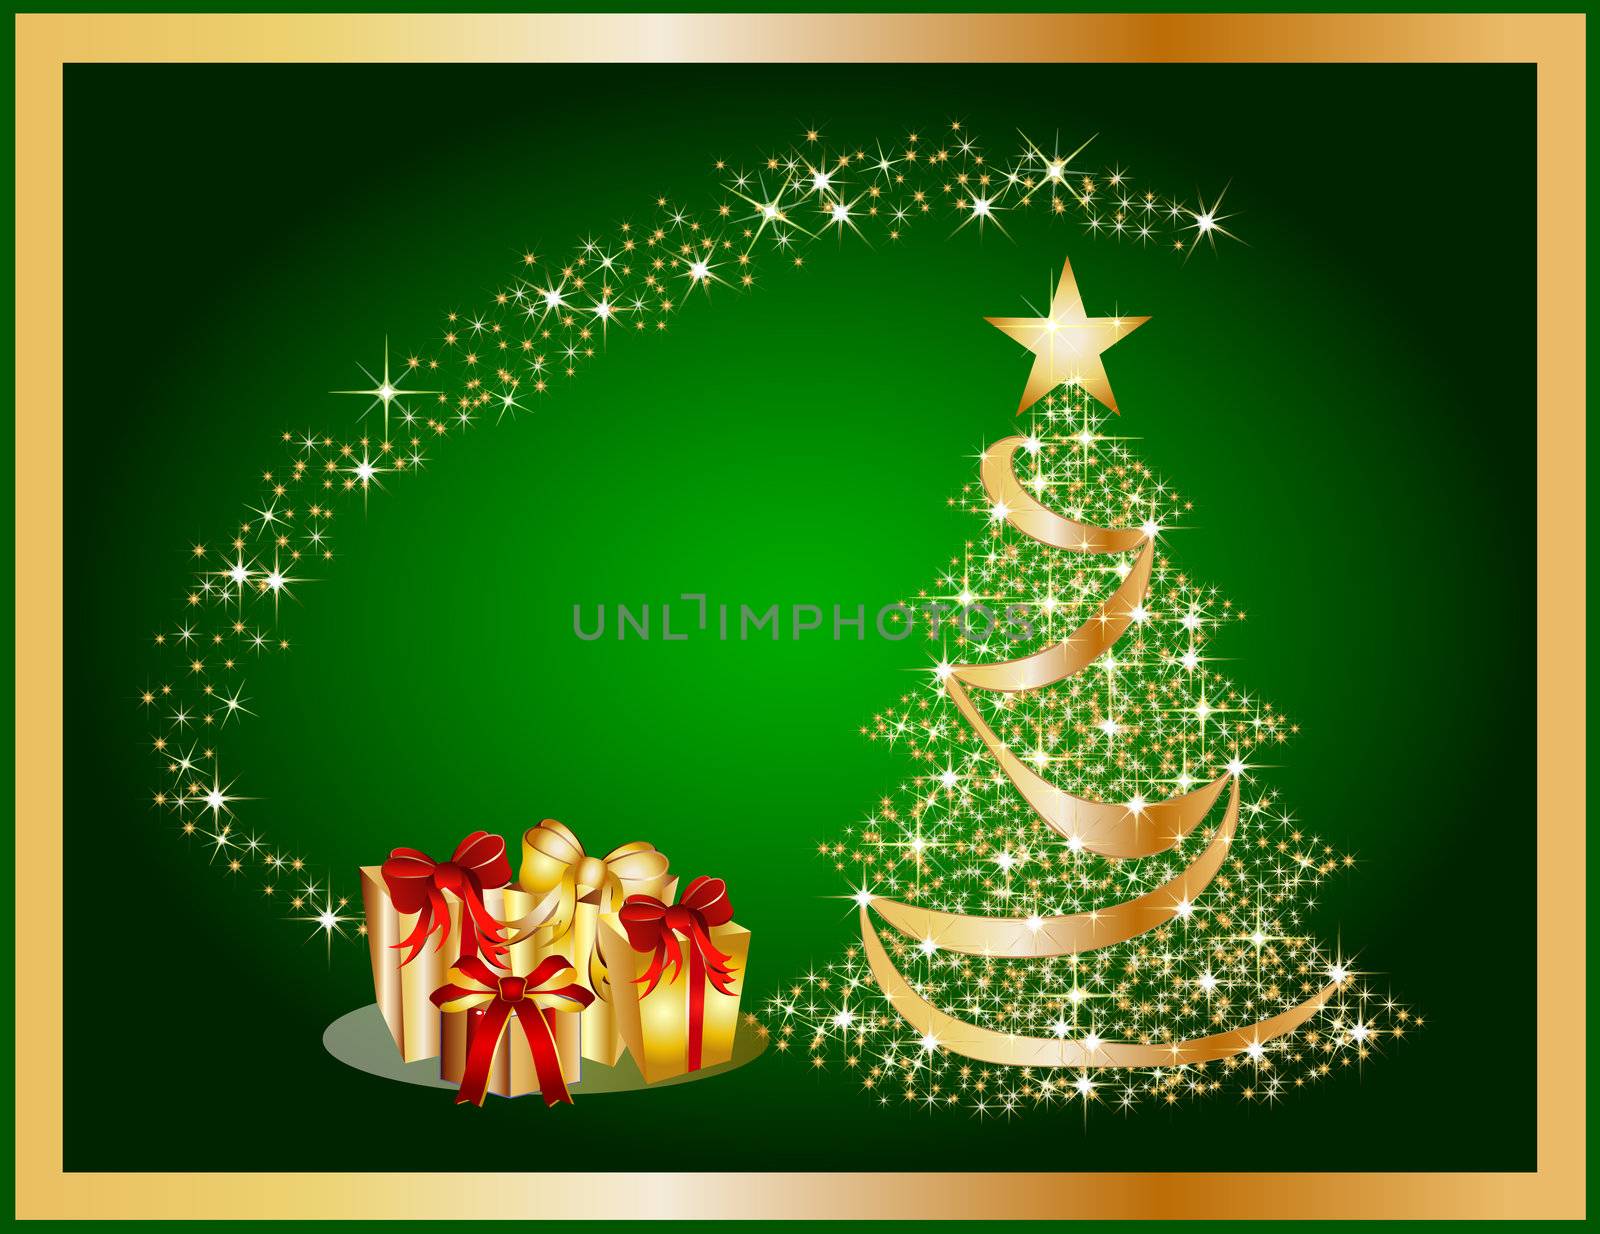 golden christmas tree on green background by peromarketing